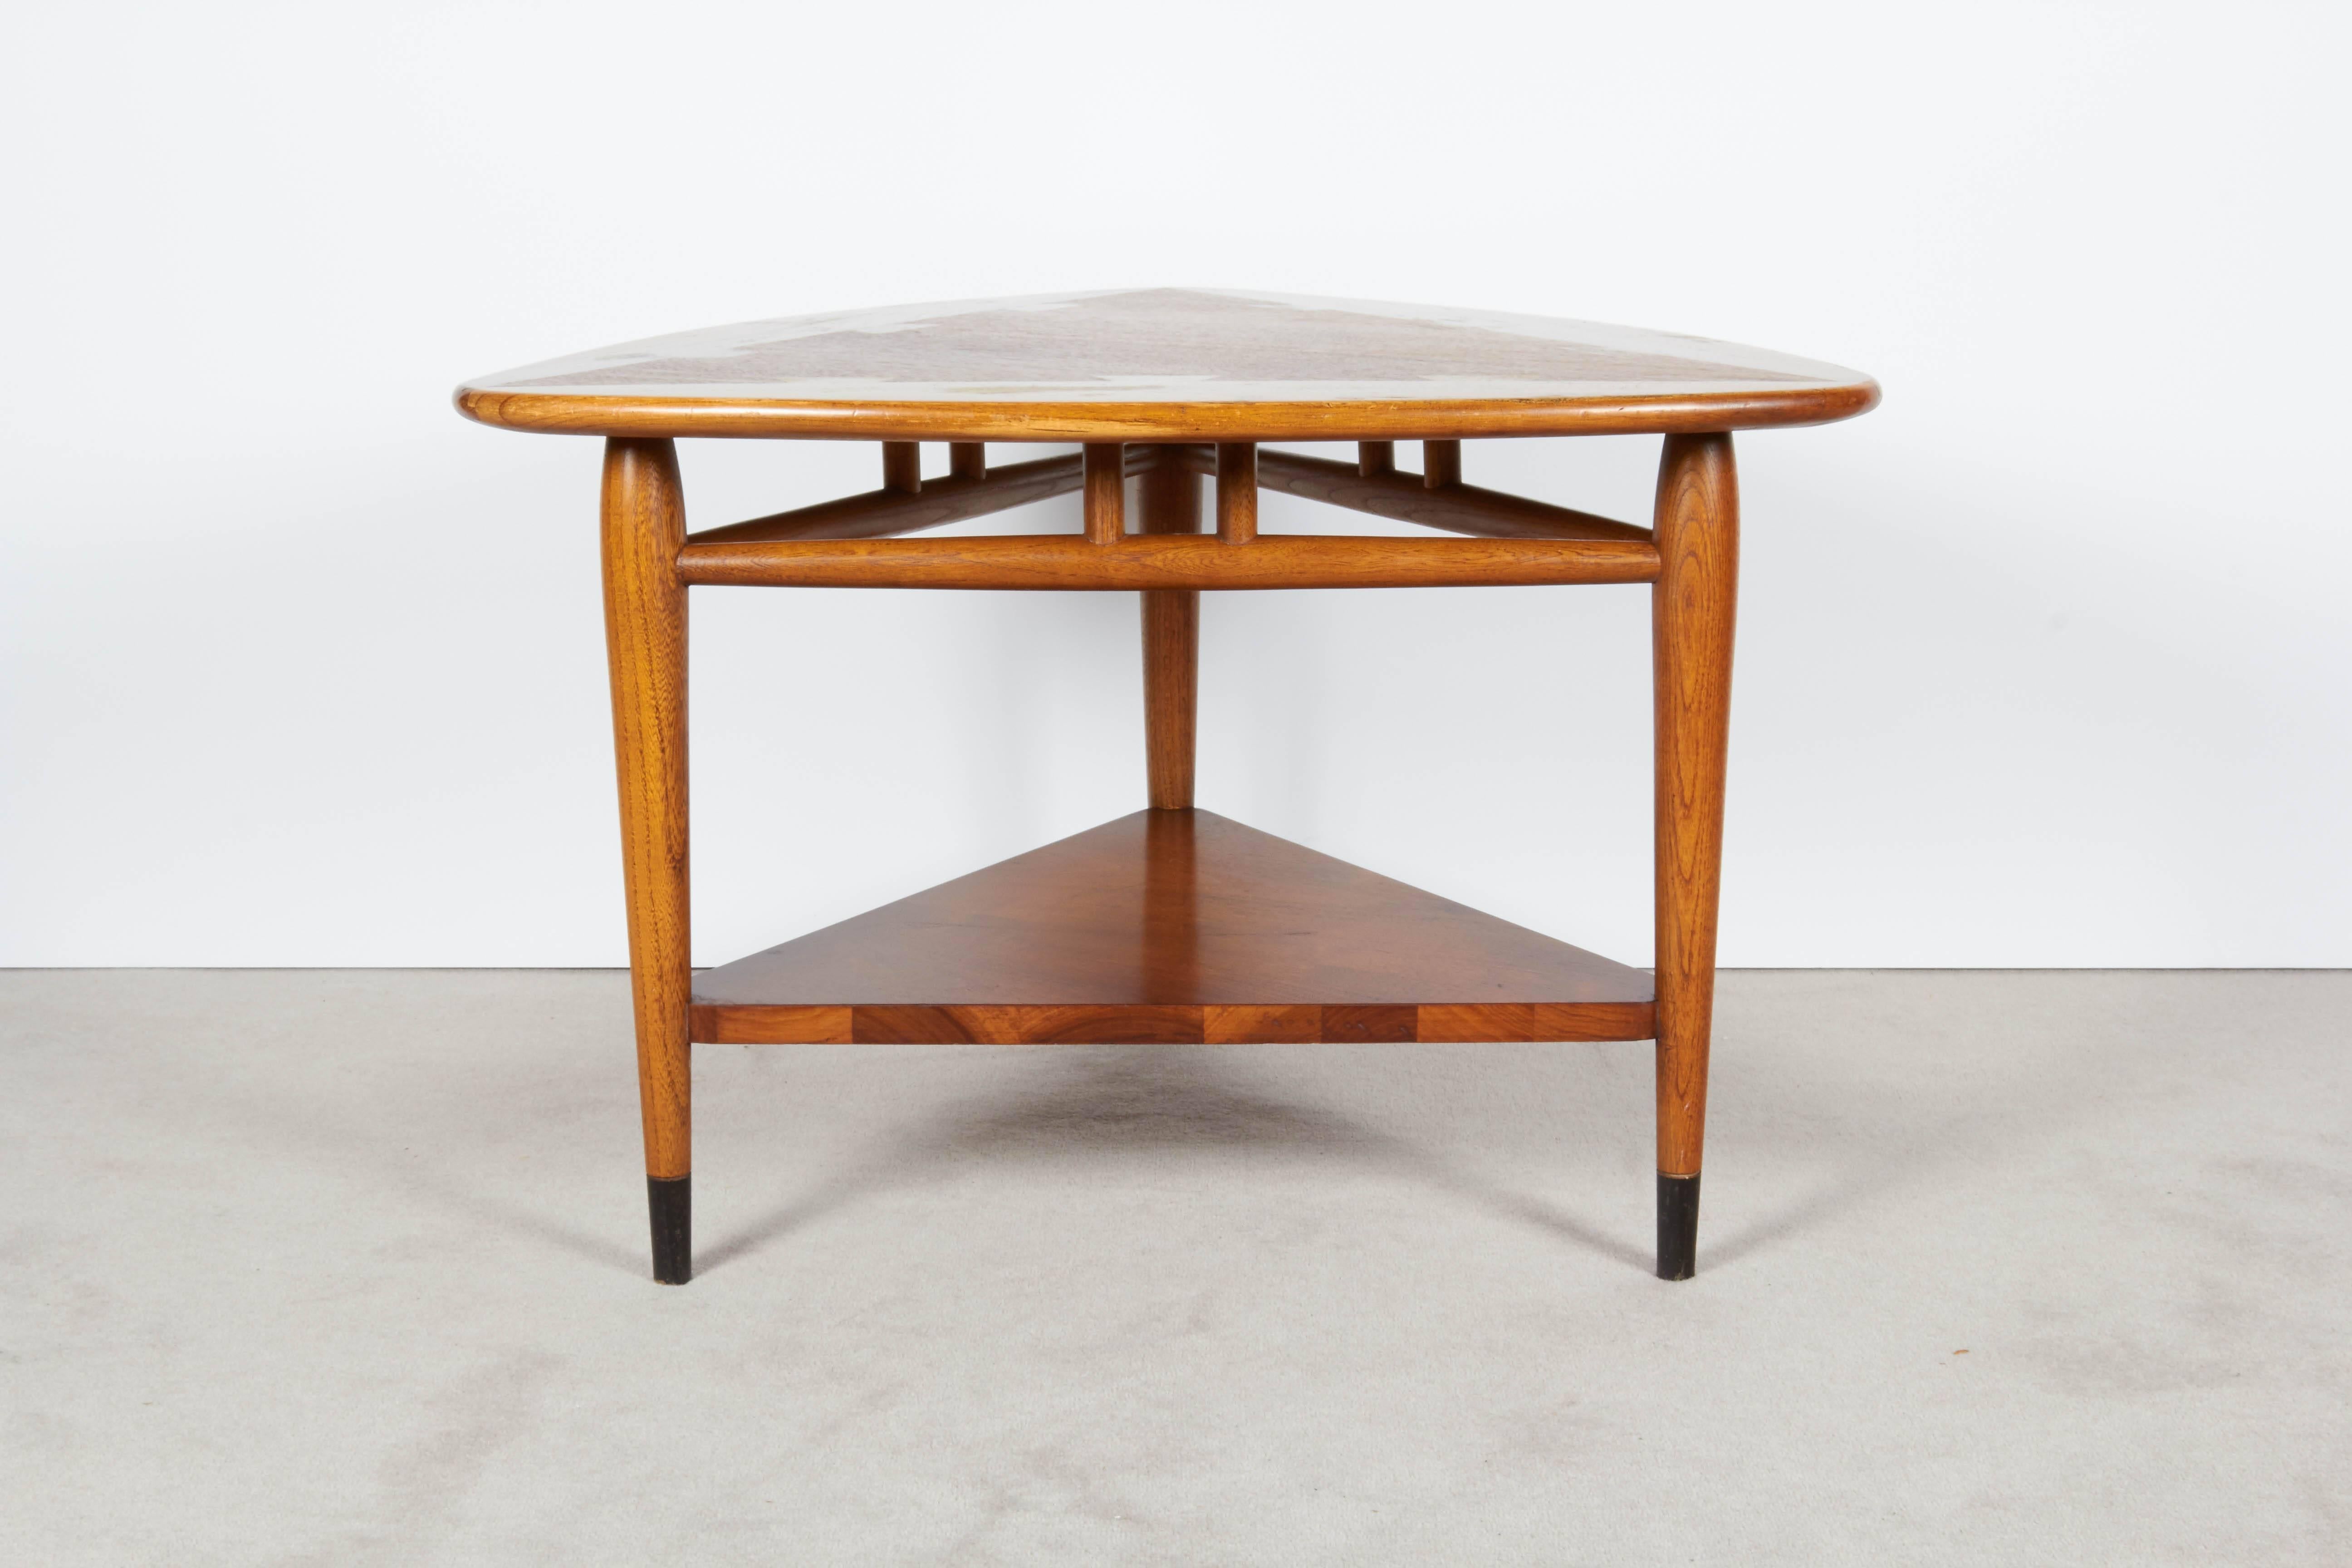 A triangular walnut table, produced by Lane, circa 1950s-1960s, with dovetail details to the top perimeter, on three tapered legs, and over a lower tier. Markings include manufacturer's stamp [Lane / Altavista, Virginia] and the serial number